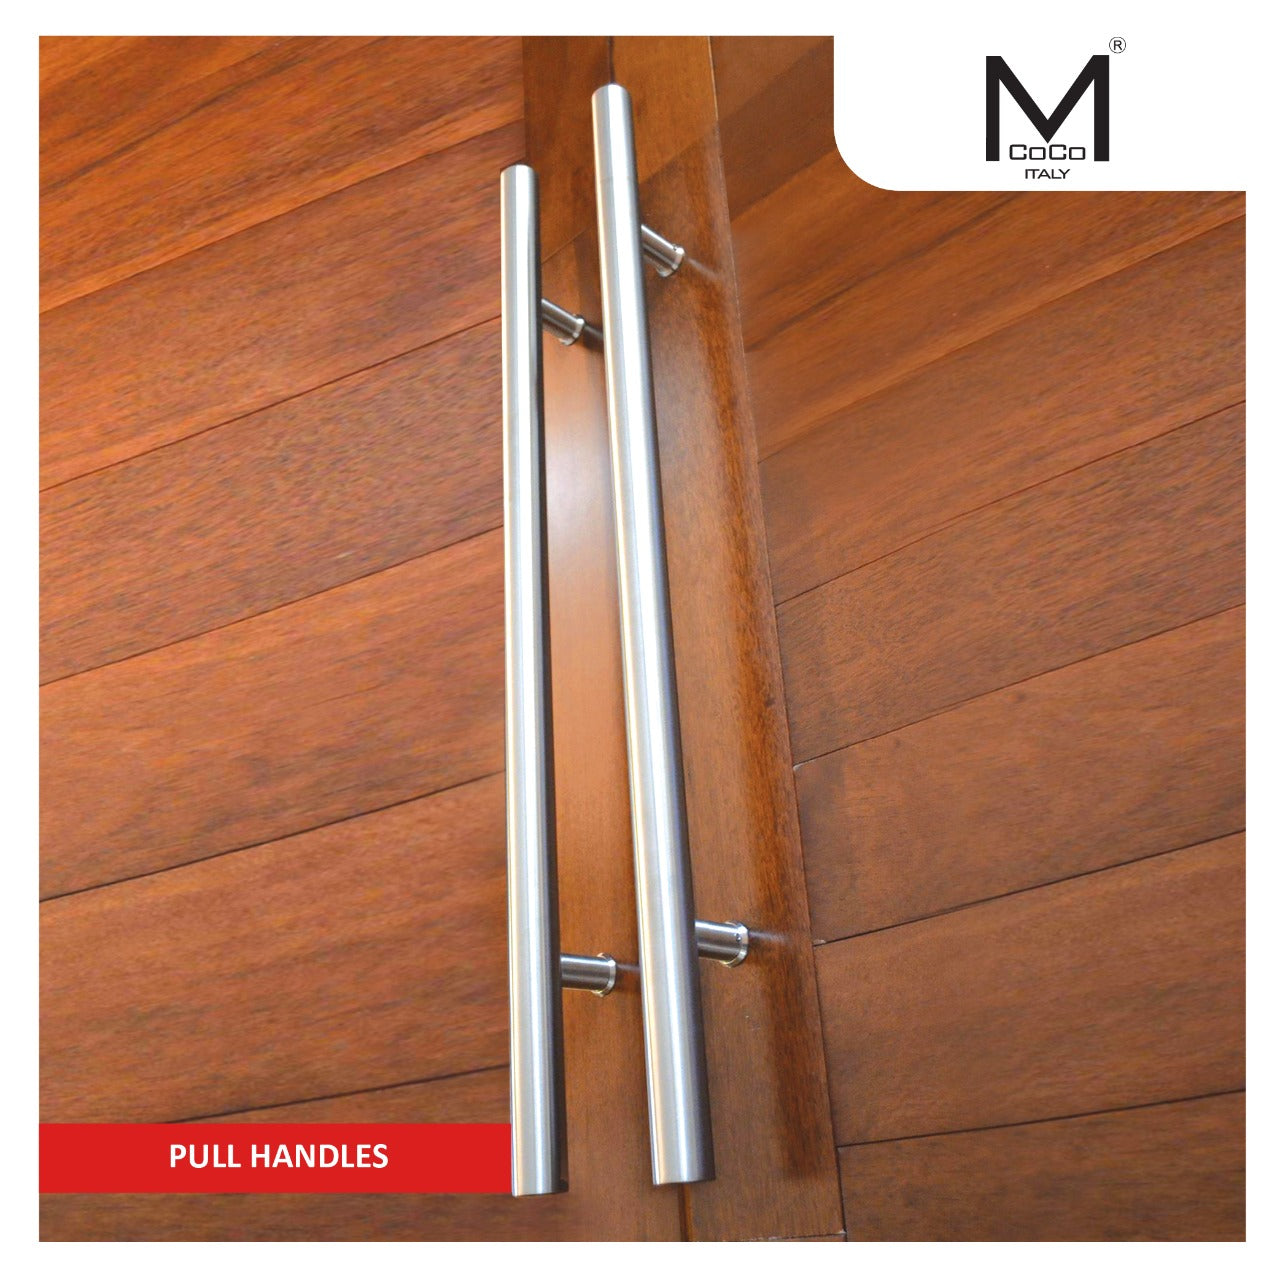 Mcoco Pull Handles - Stylish and Functional Hardware for Cabinets, Doors, and Furniture